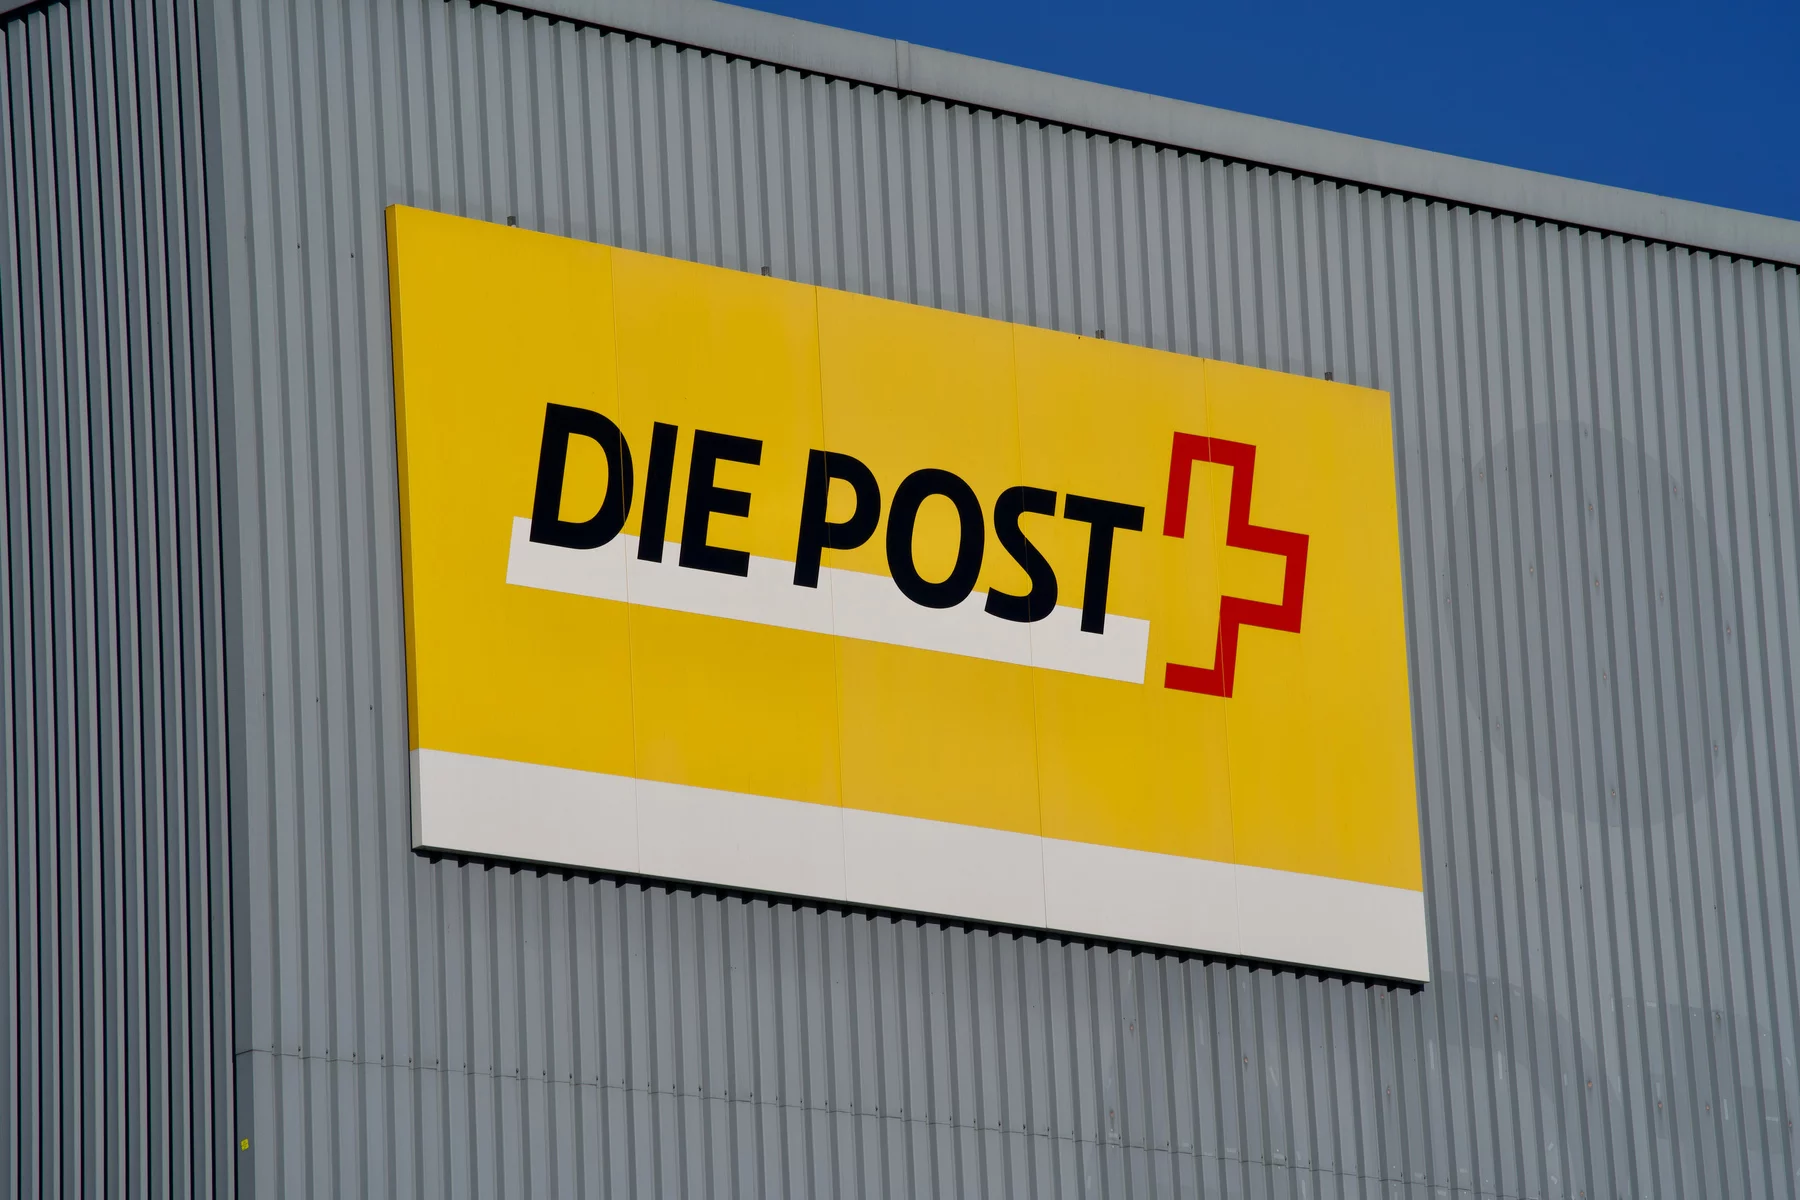 Swiss Post logo on the side of a building in German